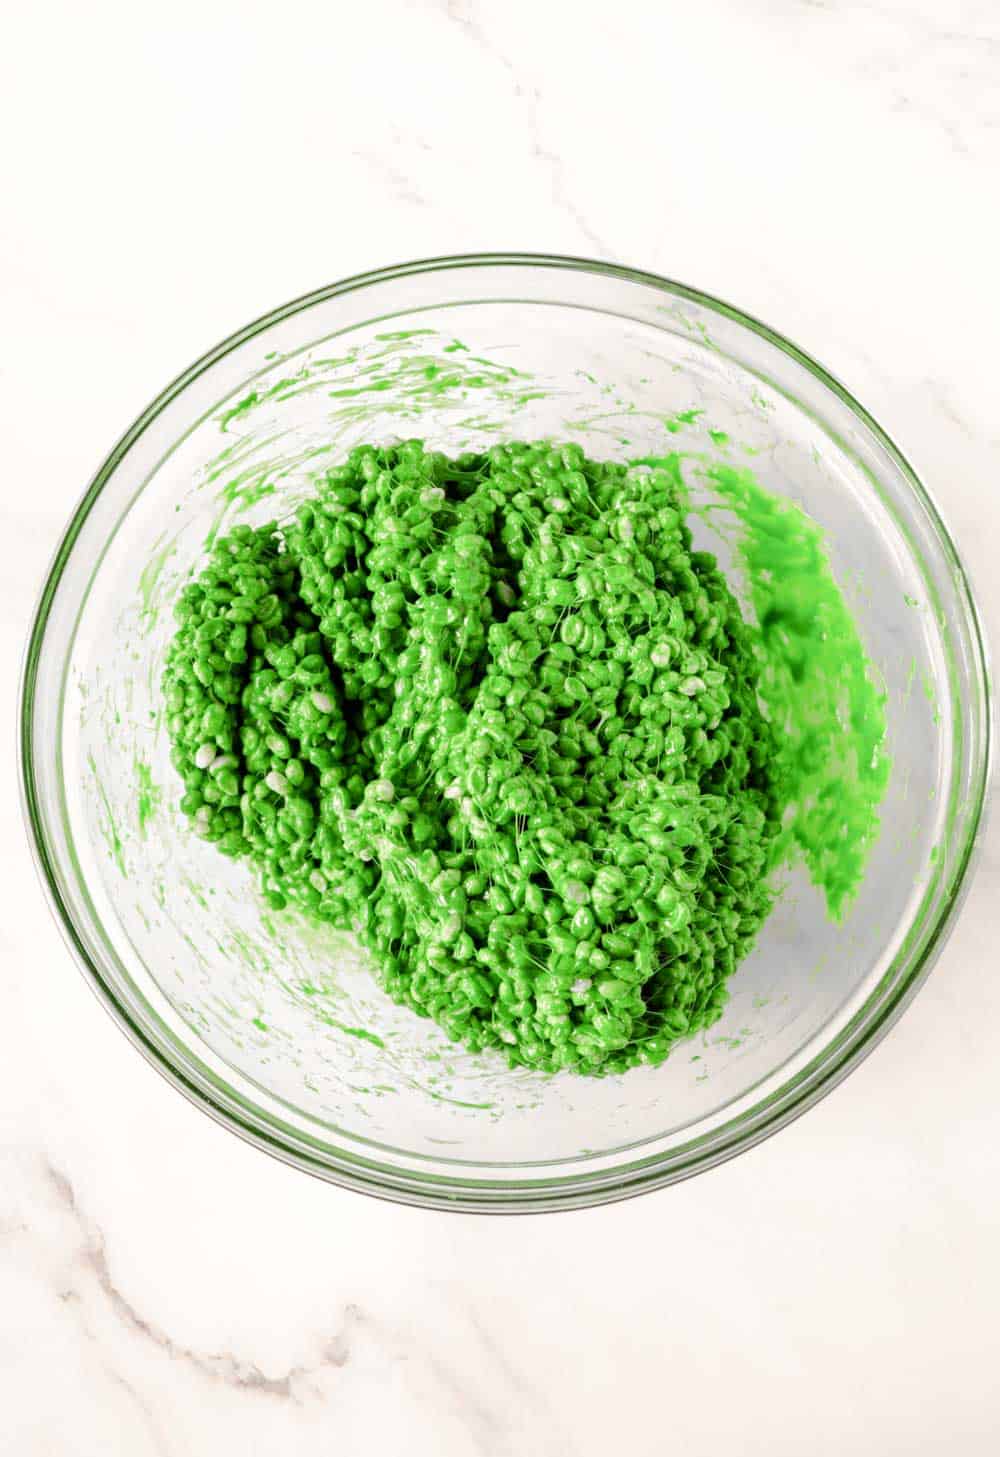 stir till it is completely combined making green rice crispy treats